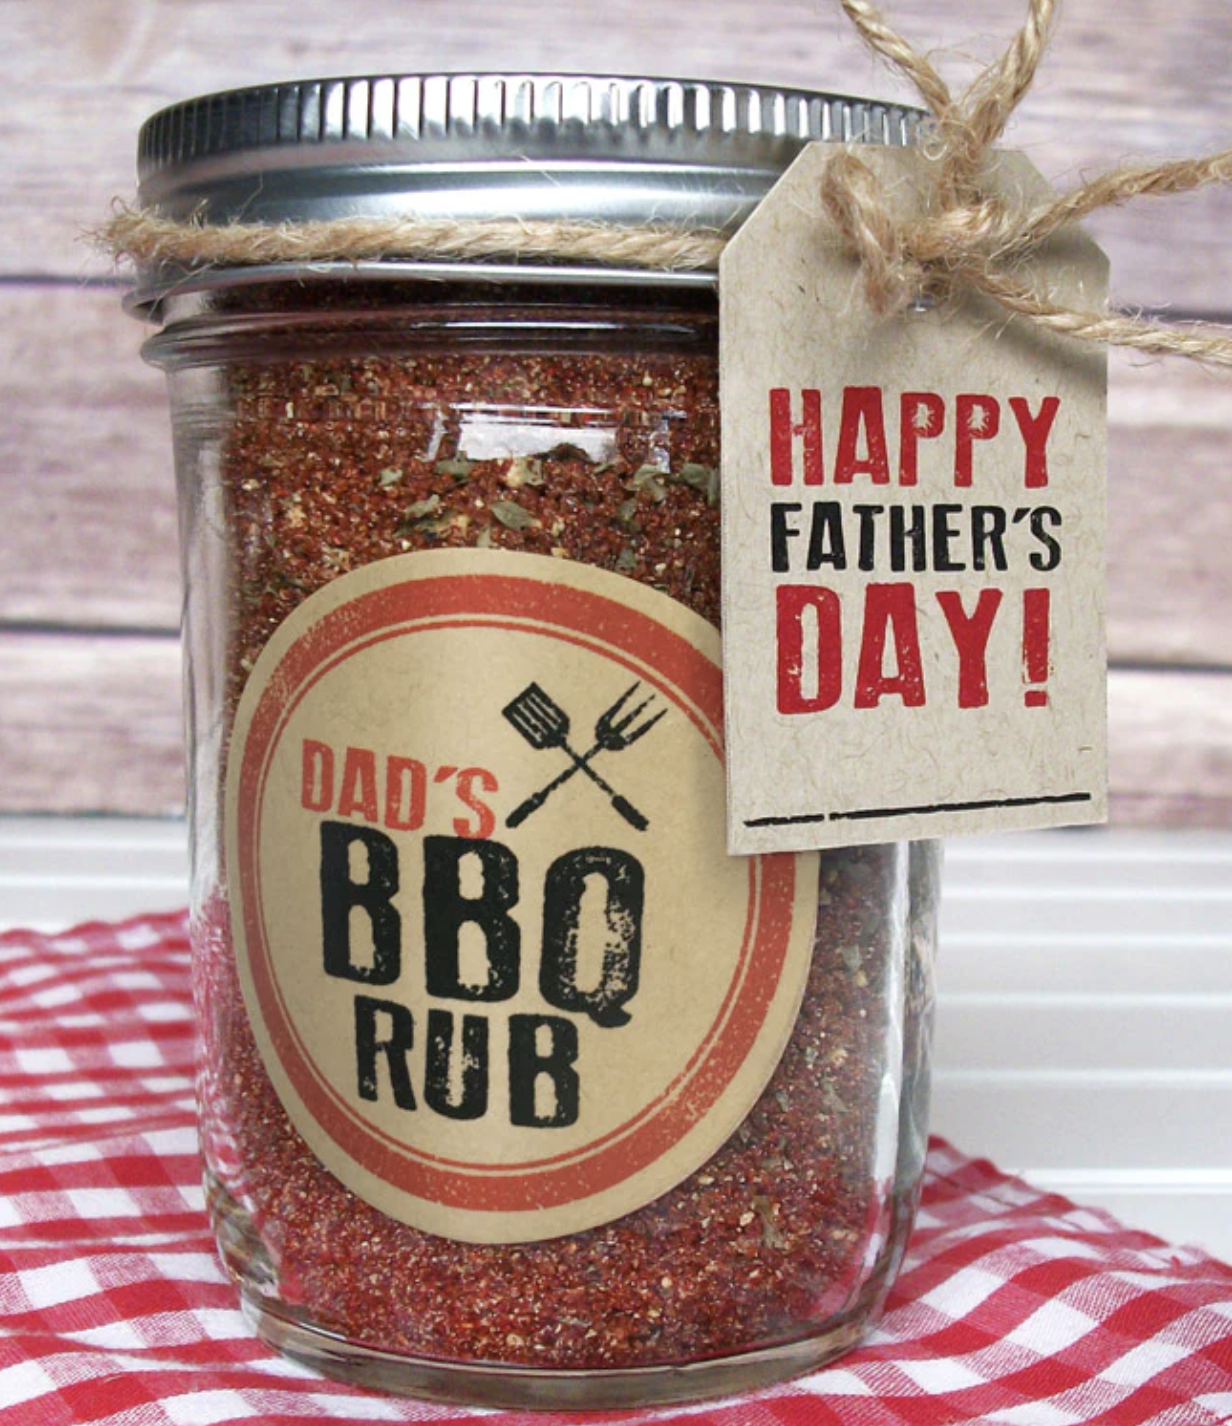 Image of a mason jar filled with spices, labeled Dad's BBQ rub, with a tag that says Happy Father's Day tied onto the lid.